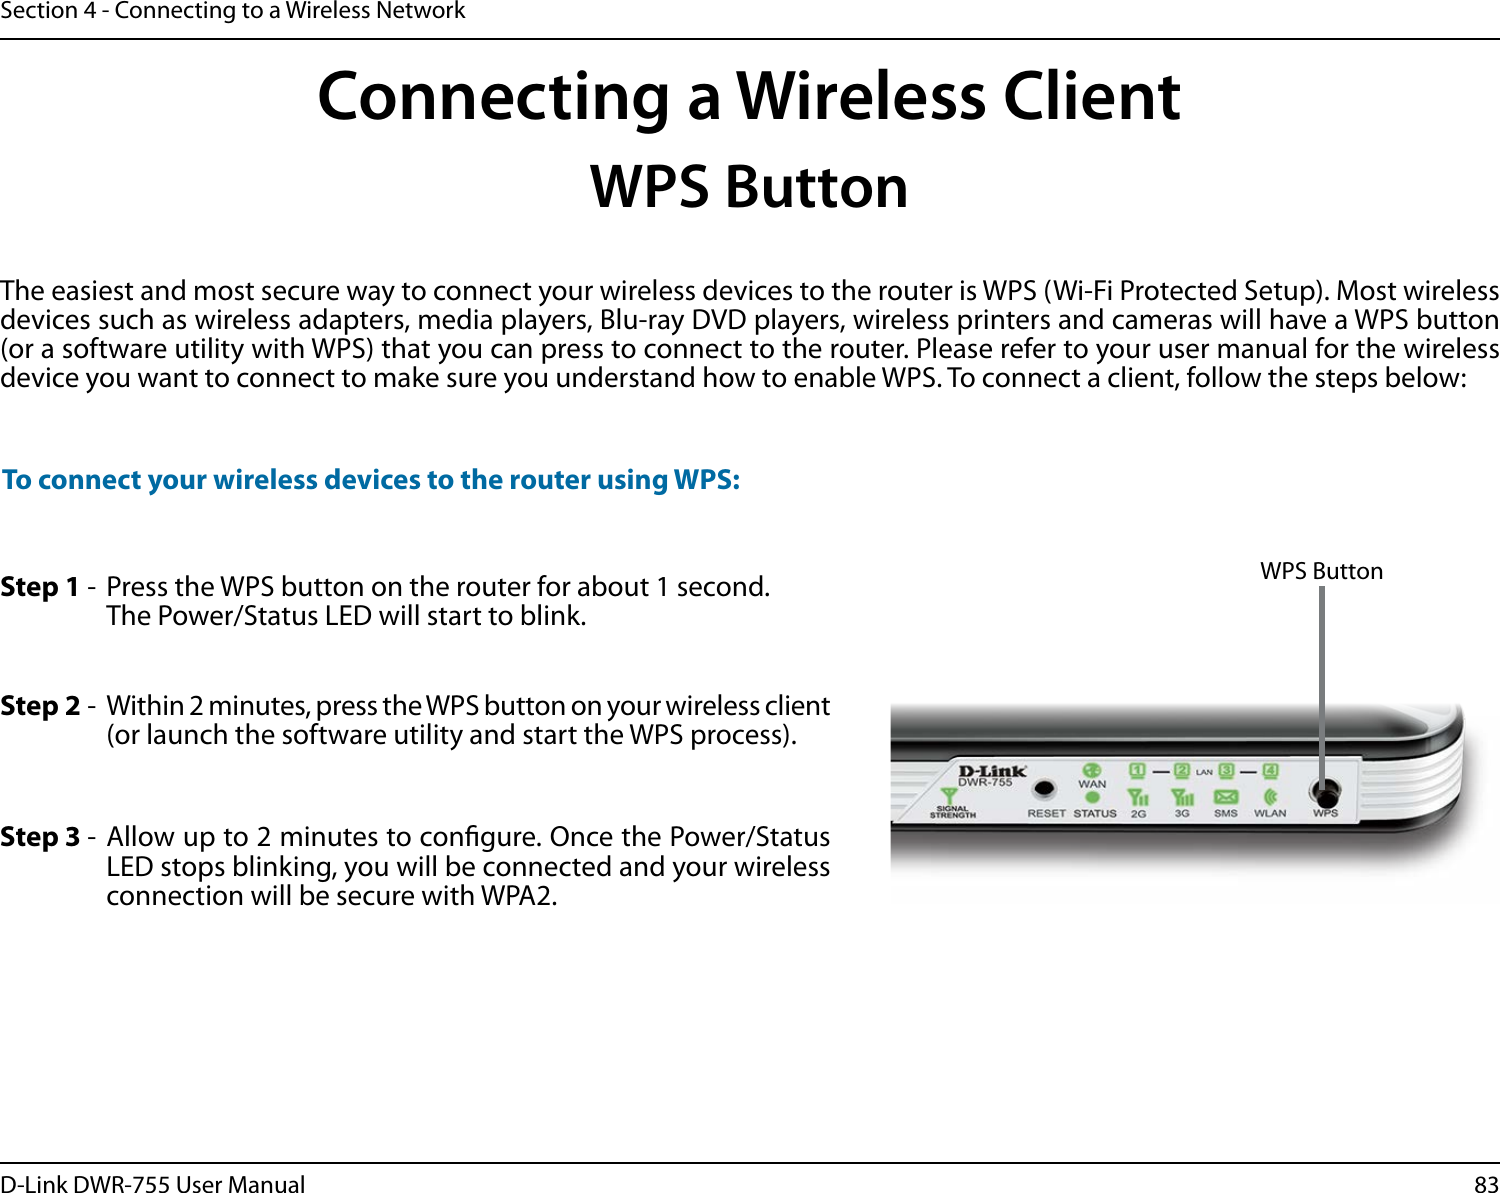 83D-Link DWR-755 User ManualSection 4 - Connecting to a Wireless NetworkStep 2 -  Within 2 minutes, press the WPS button on your wireless client (or launch the software utility and start the WPS process).Step 1 -  Press the WPS button on the router for about 1 second. The Power/Status LED will start to blink.Step 3 - Allow up to 2 minutes to congure. Once the Power/Status LED stops blinking, you will be connected and your wireless connection will be secure with WPA2.To connect your wireless devices to the router using WPS:Connecting a Wireless ClientWPS ButtonThe easiest and most secure way to connect your wireless devices to the router is WPS (Wi-Fi Protected Setup). Most wireless devices such as wireless adapters, media players, Blu-ray DVD players, wireless printers and cameras will have a WPS button (or a software utility with WPS) that you can press to connect to the router. Please refer to your user manual for the wireless device you want to connect to make sure you understand how to enable WPS. To connect a client, follow the steps below:WPS Button